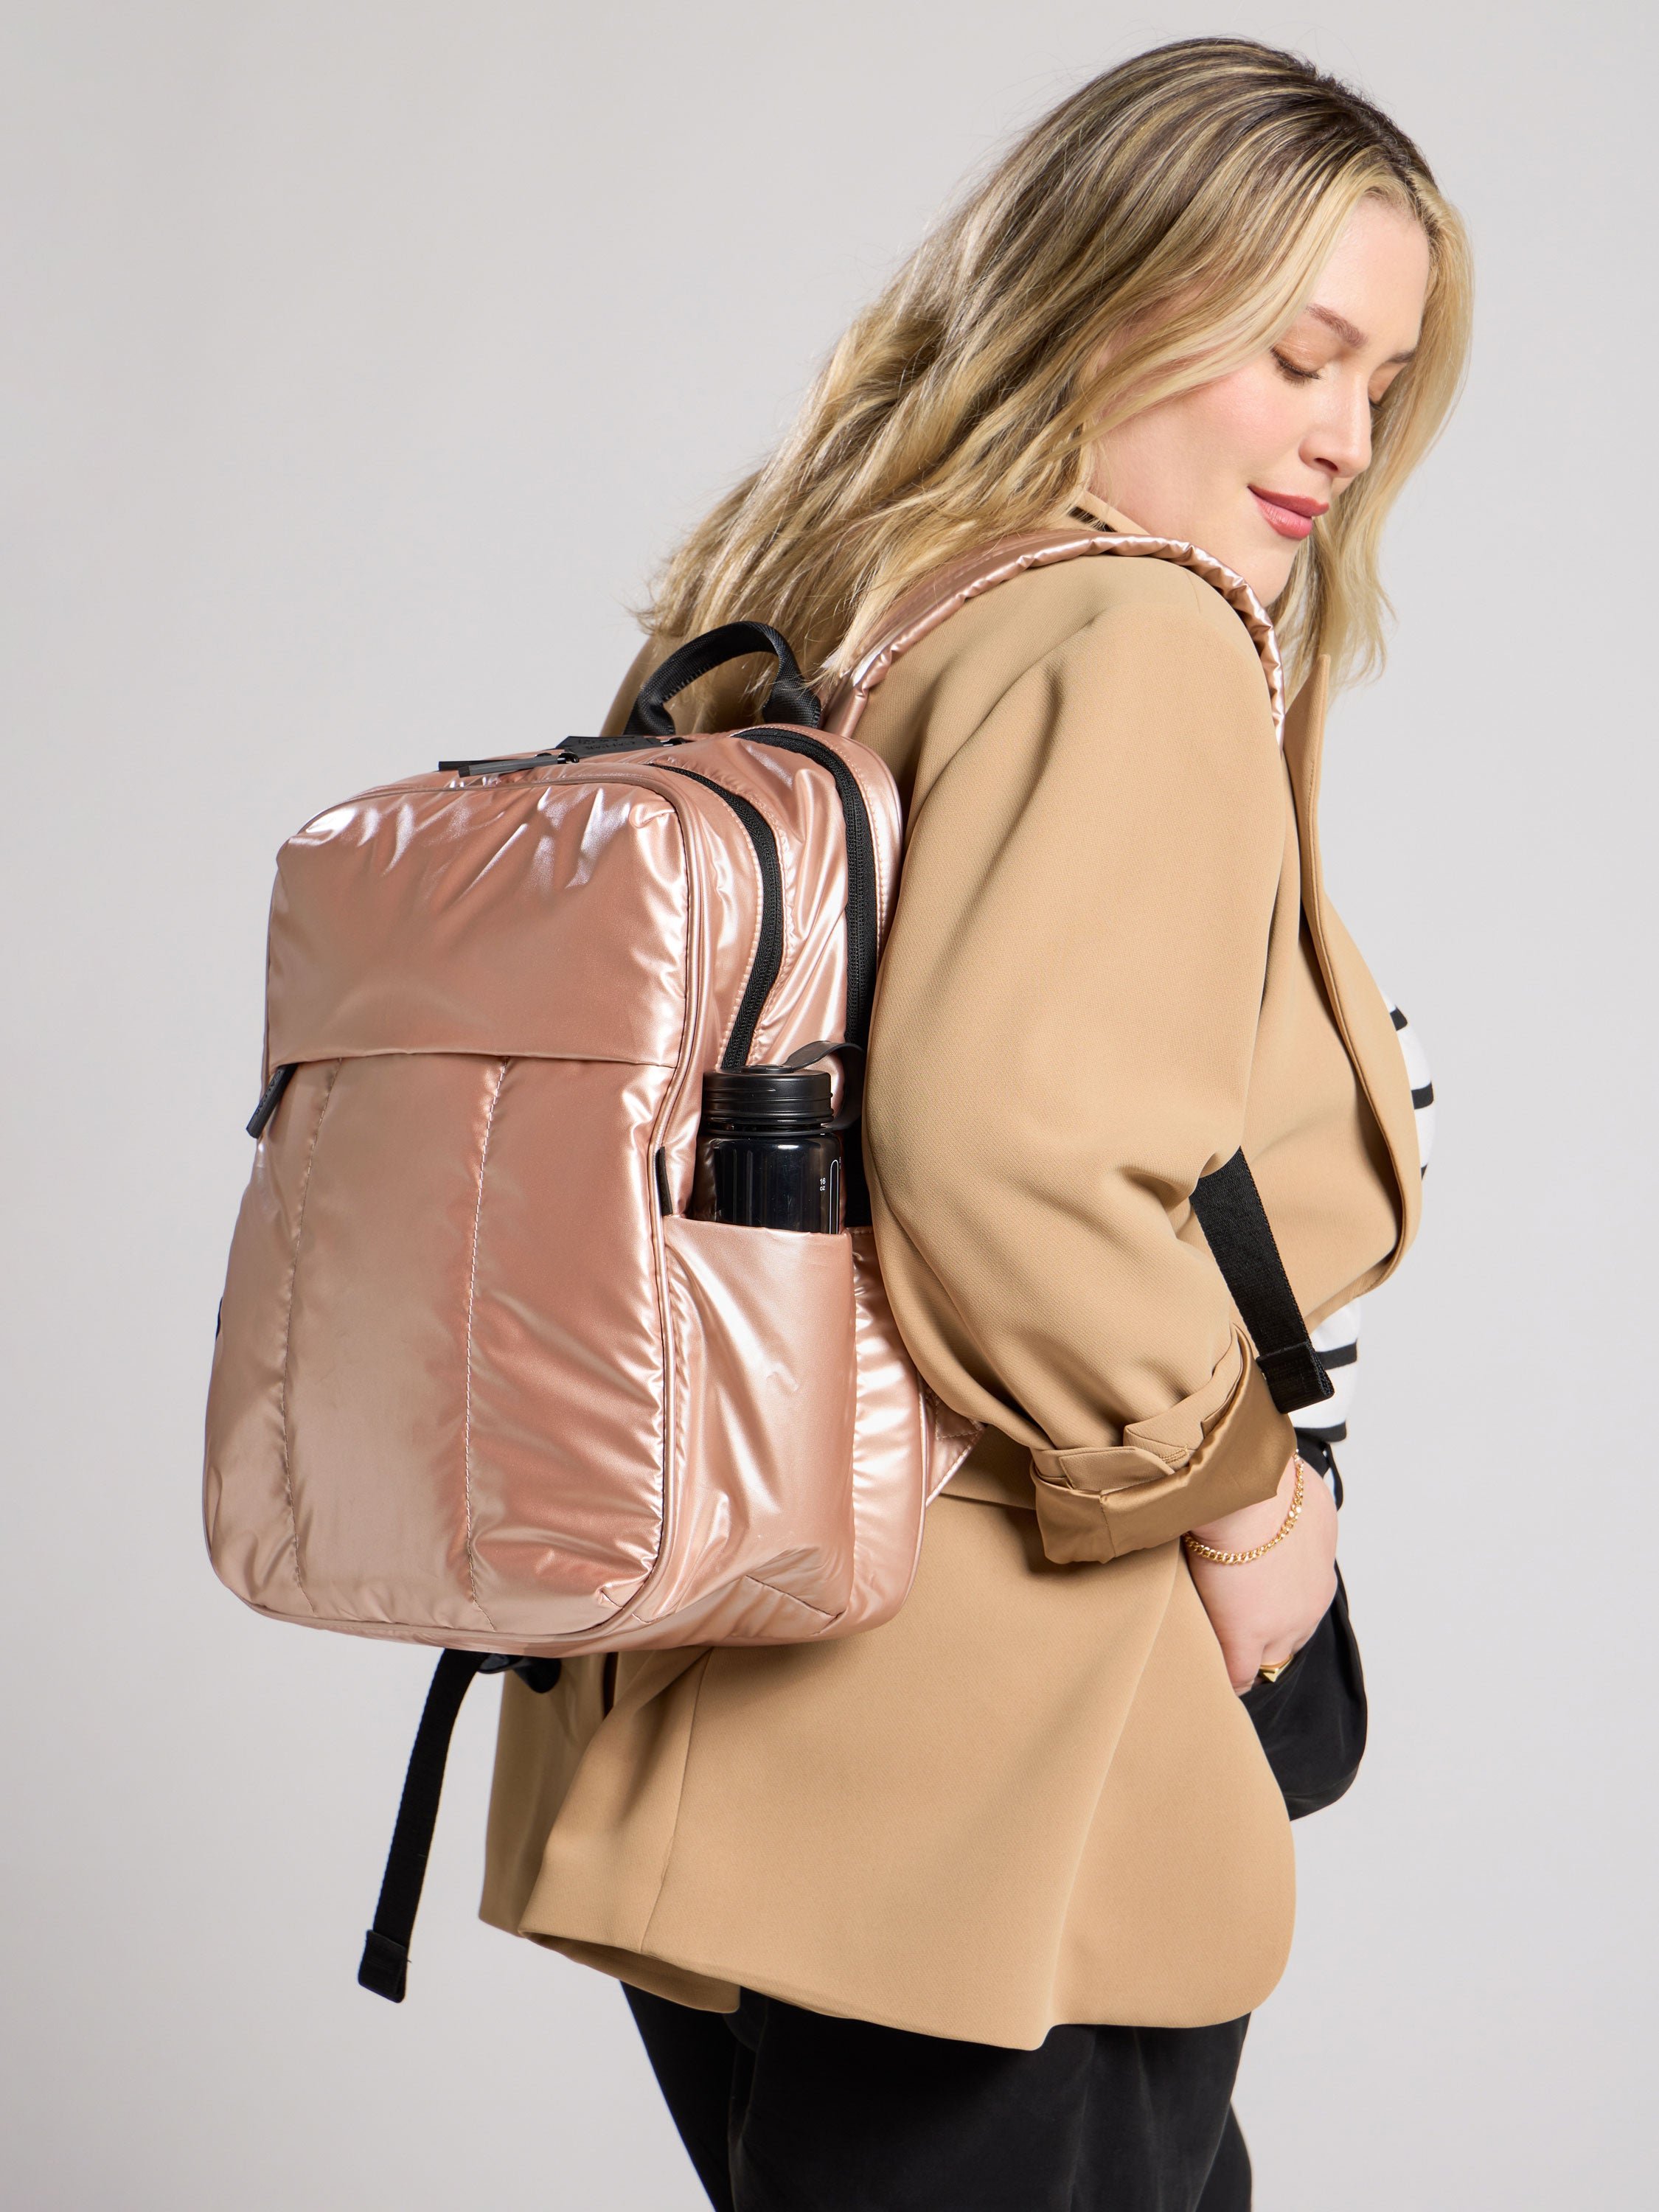 Model wearing Luka 15 inch Laptop Backpack on back with water bottle in exterior pocket in rose gold